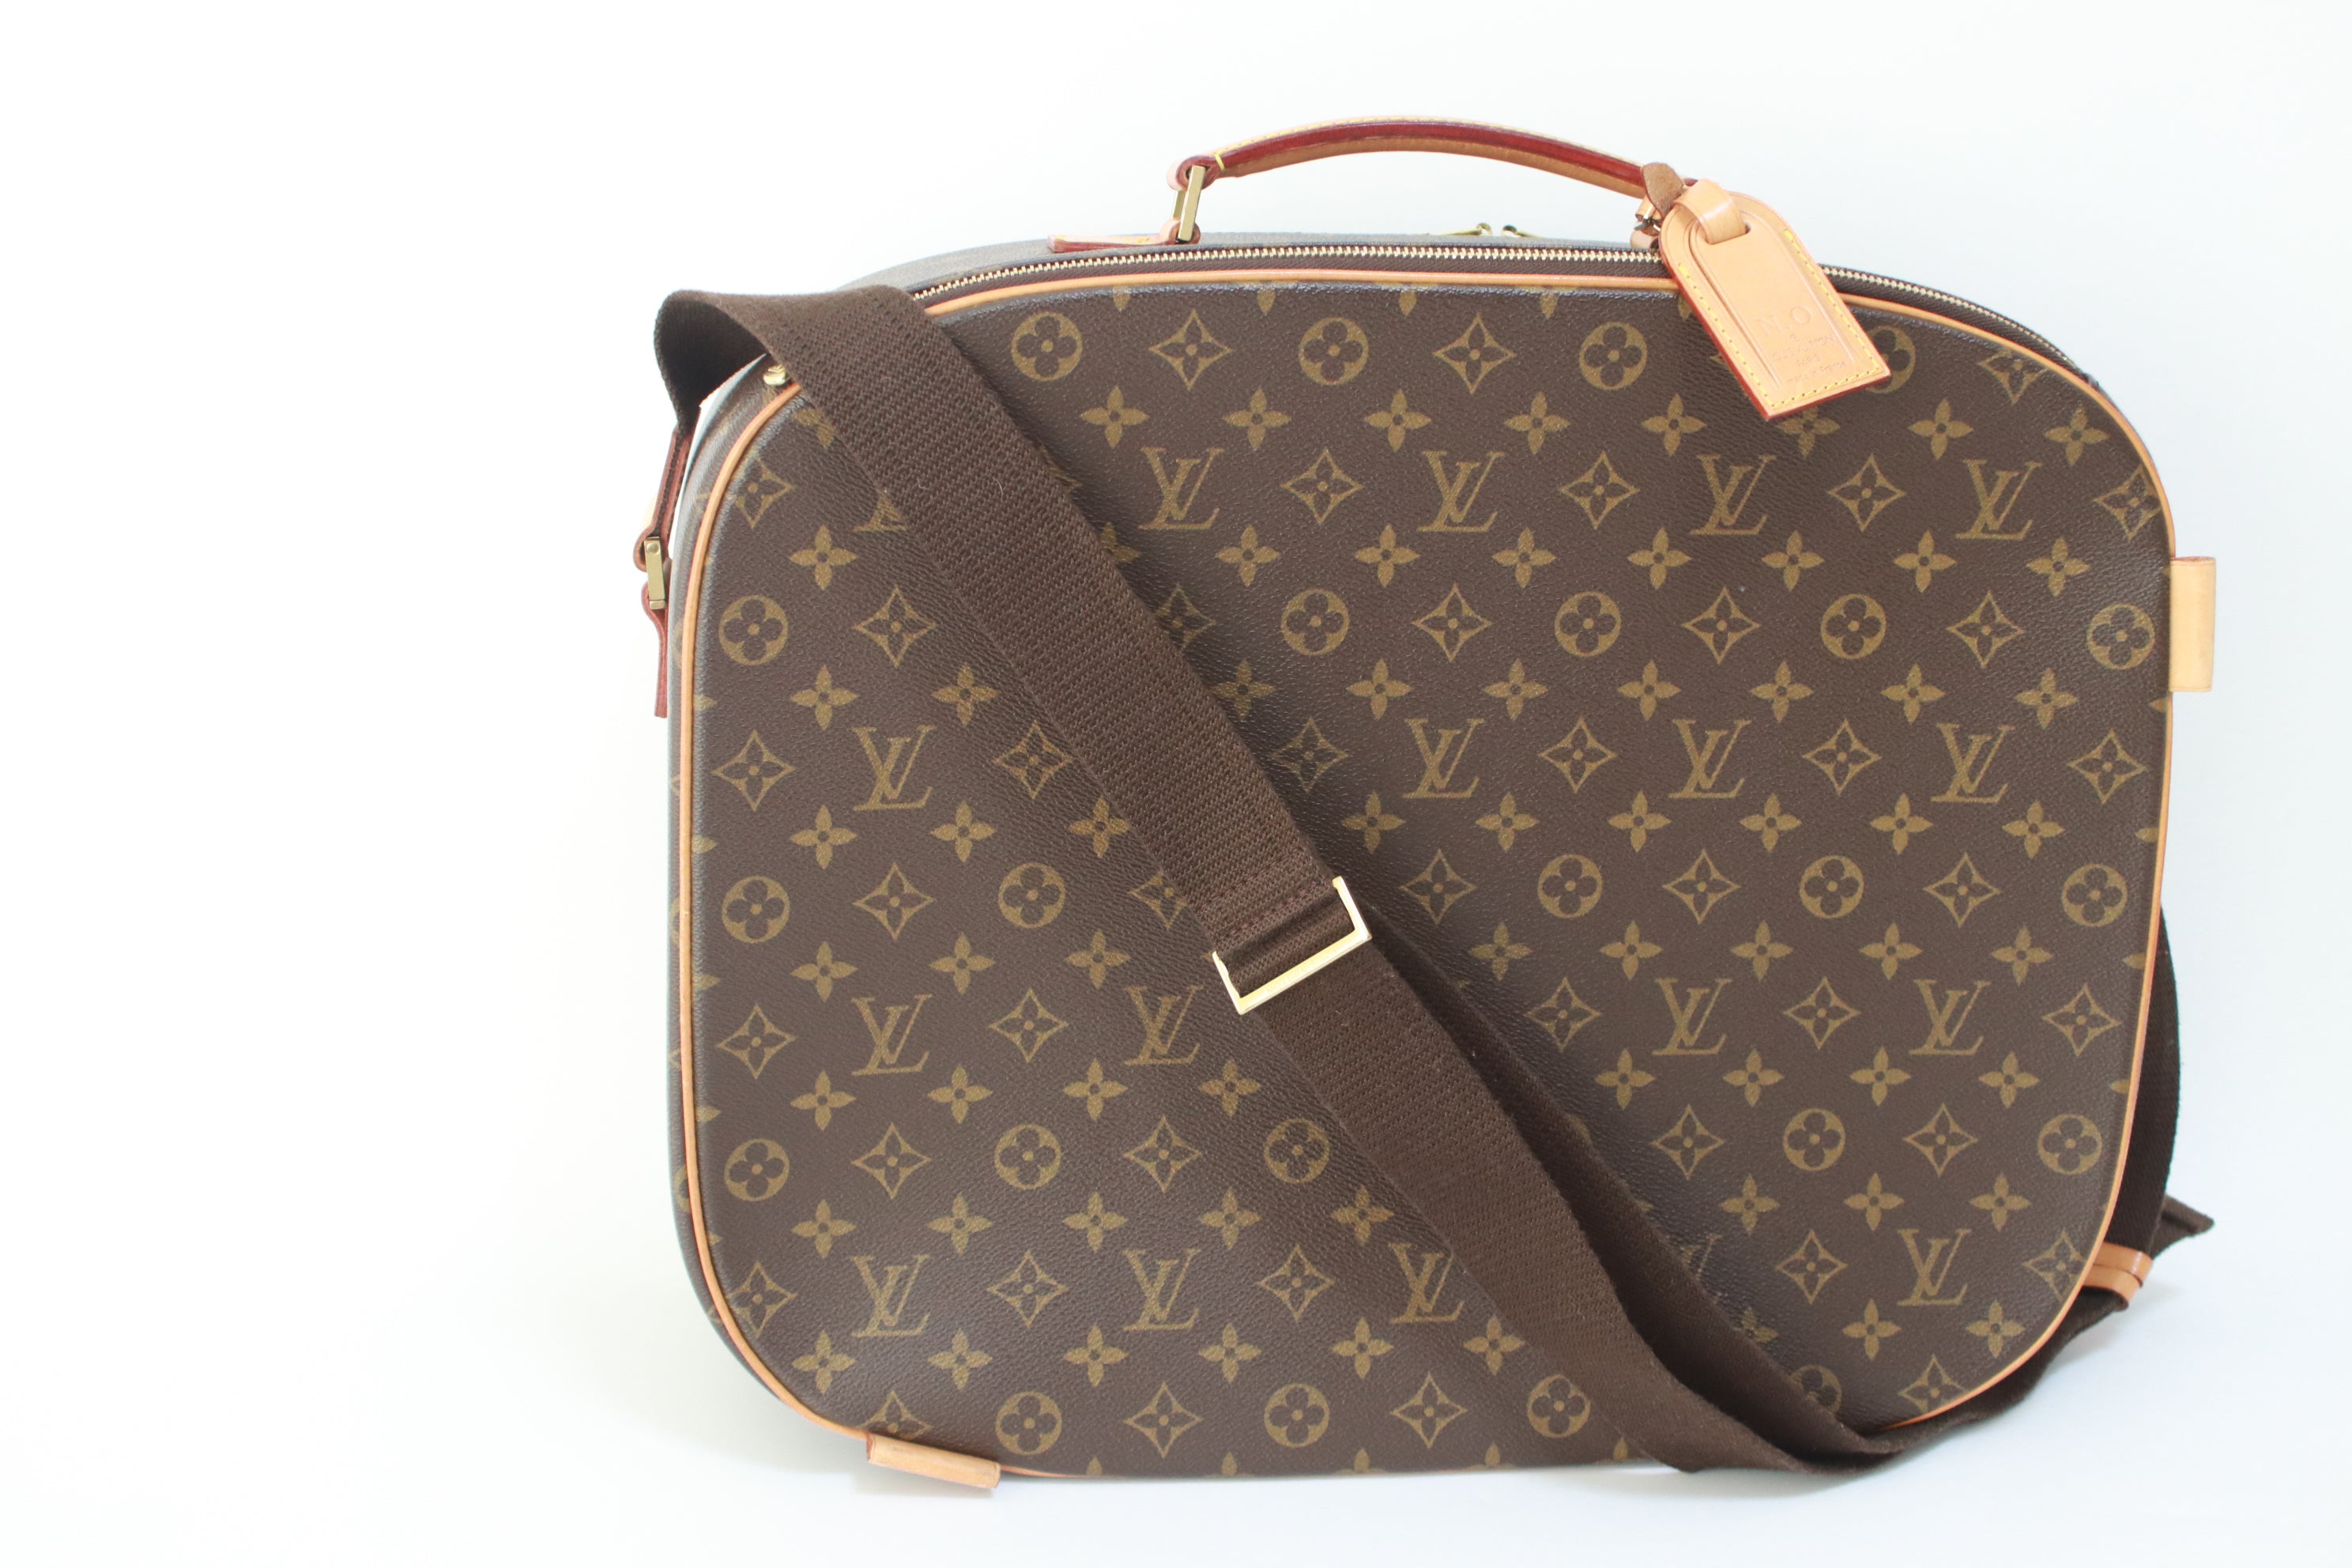 Luxury bags auction in japan Archives - AuthenticExperts